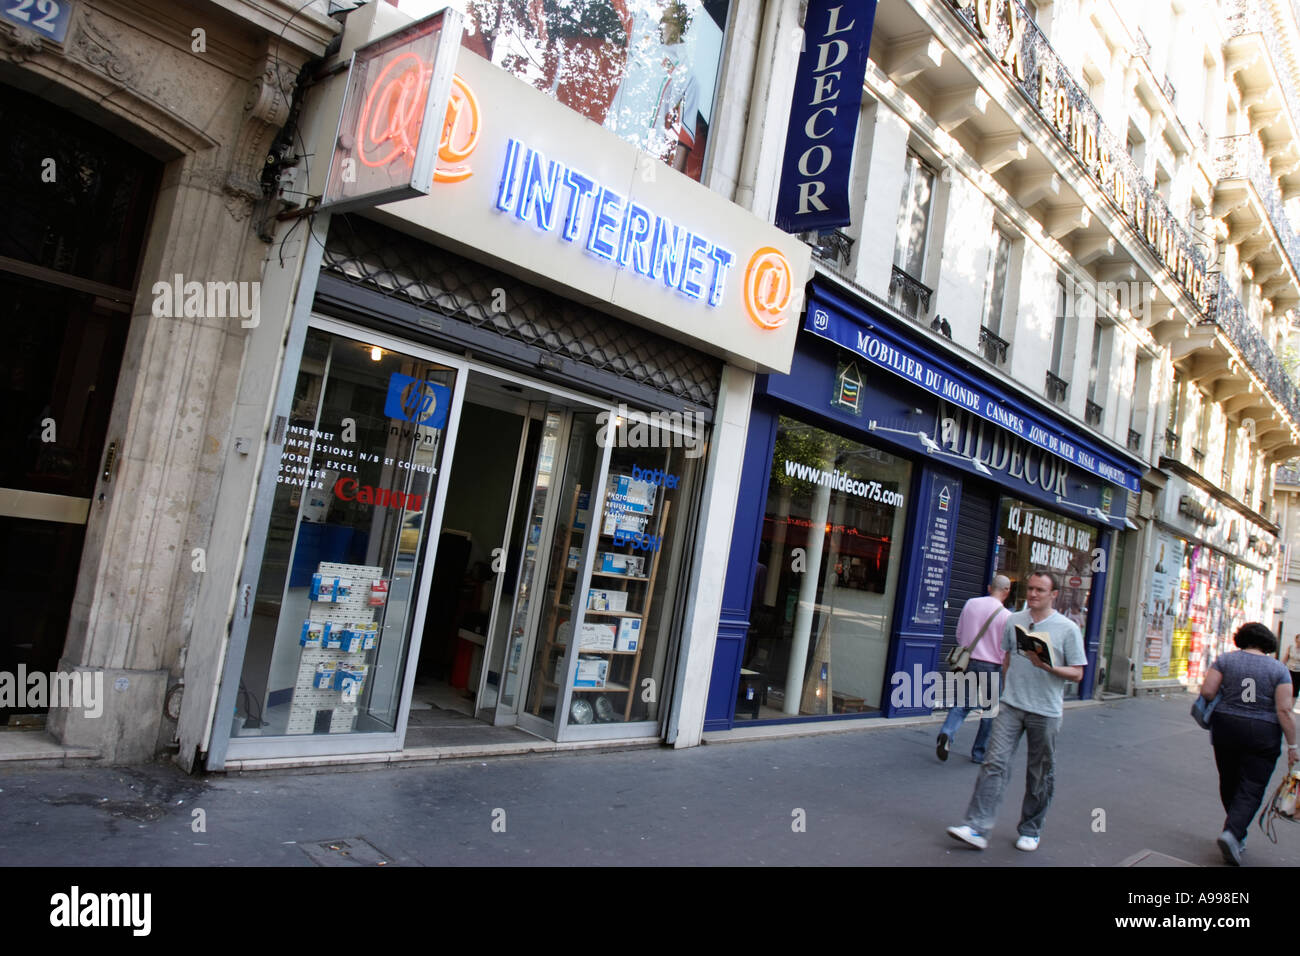 22.04.2007. Internet Cafe in Paris, France Stock Photo